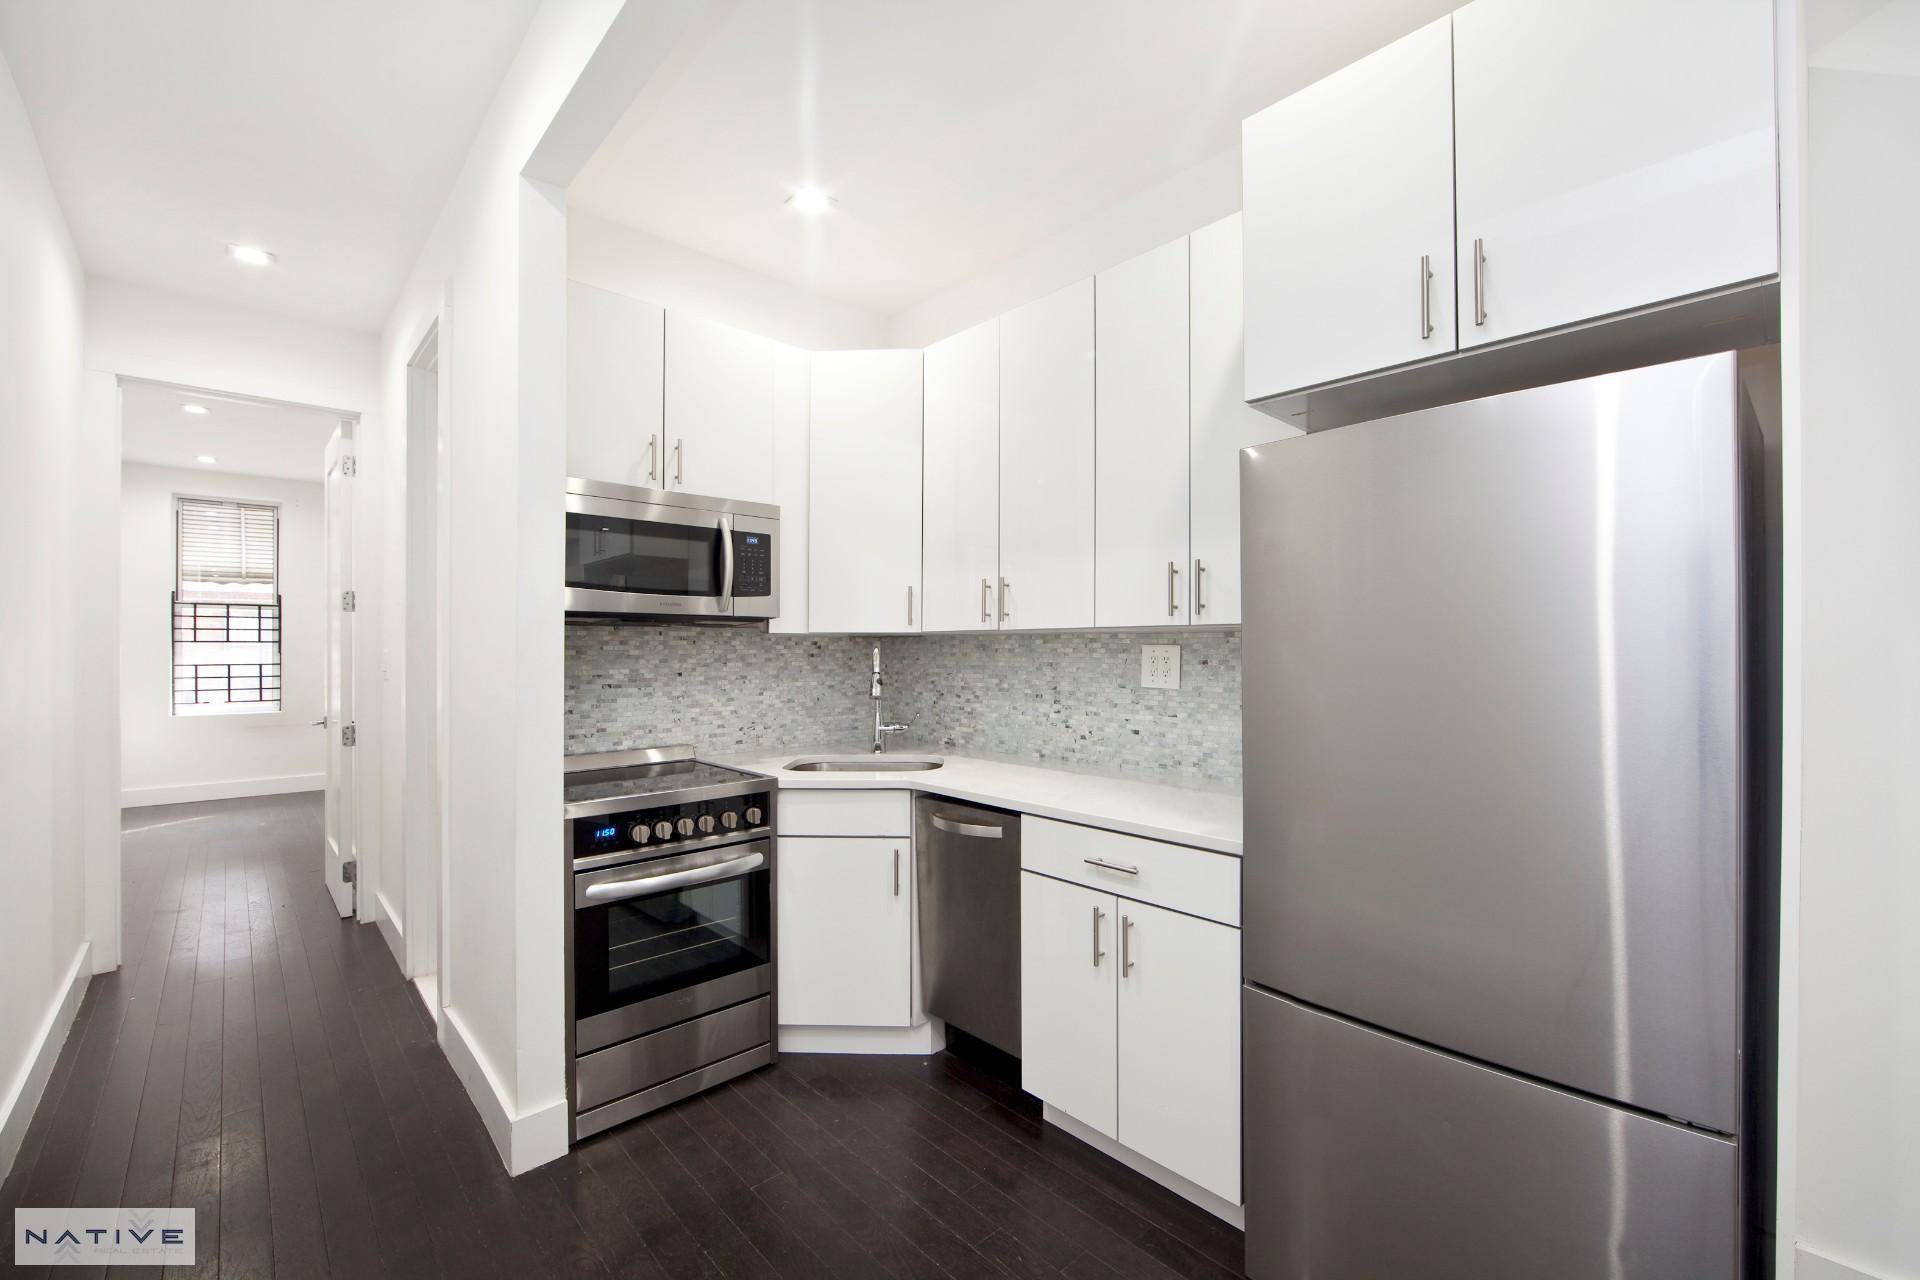 NO FEE ! JUST HIT MARKET Stunning 2 bedroom, 2 full bathroom apartment in the epicenter of Bushwick !